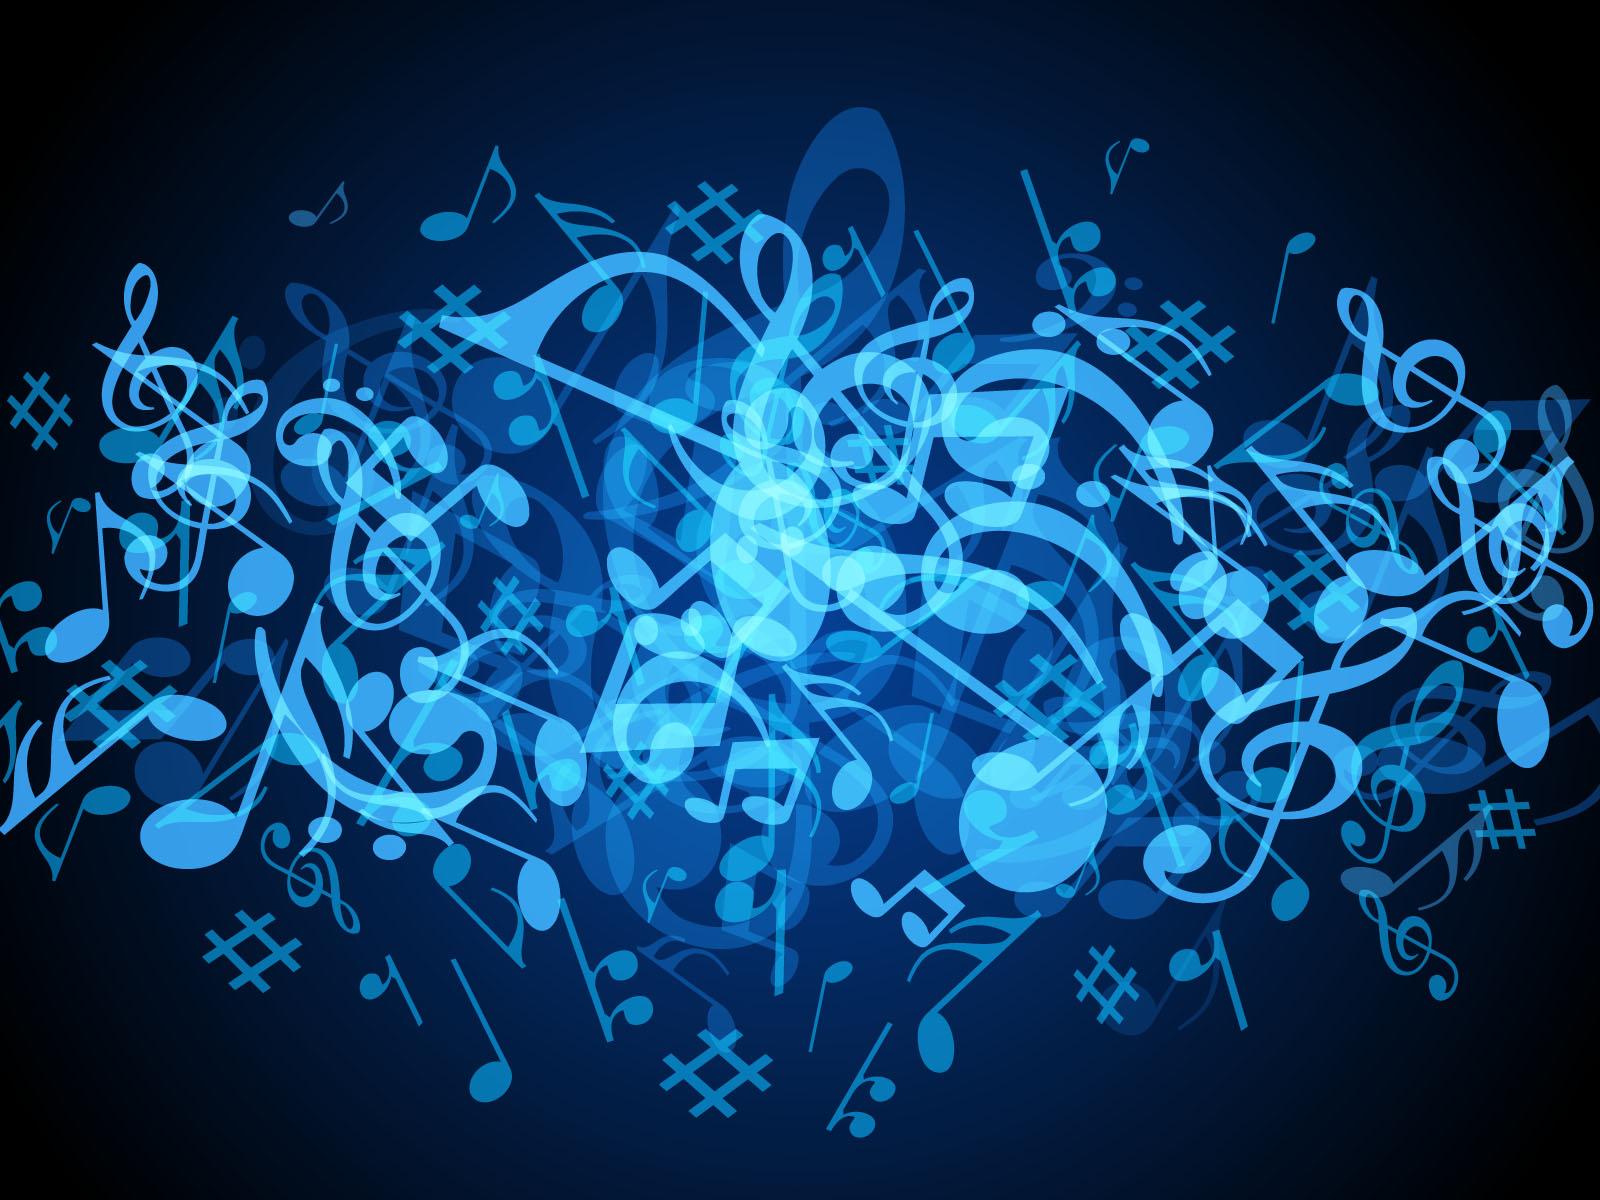 Music Notes Backgrounds Wallpaper Cave HD Wallpapers Download Free Images Wallpaper [wallpaper981.blogspot.com]